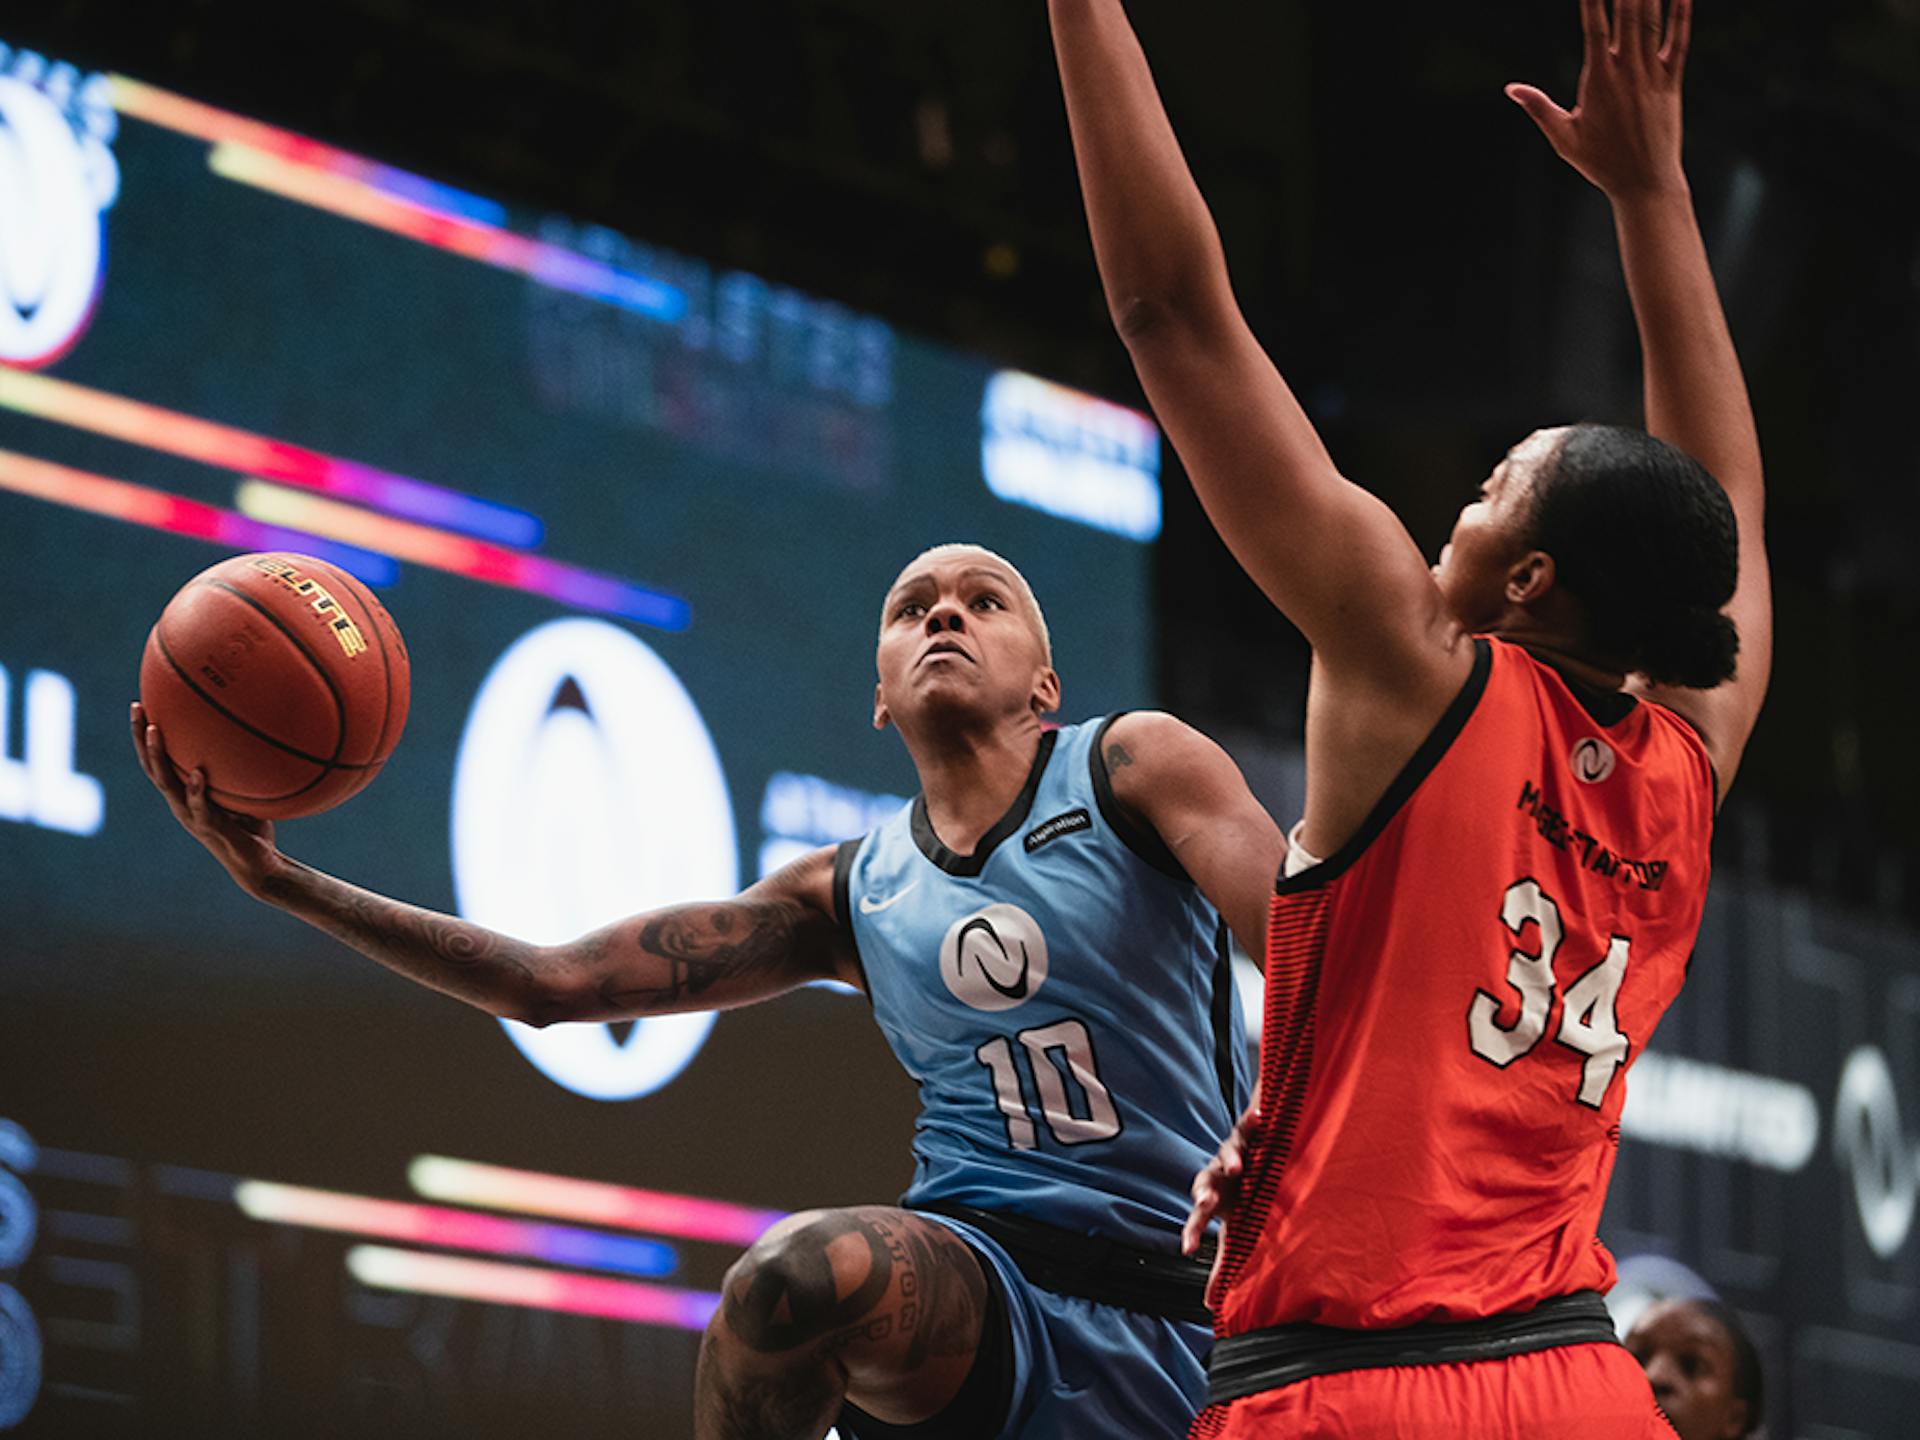 WNBA players gear up for a second Athletes Unlimited basketball